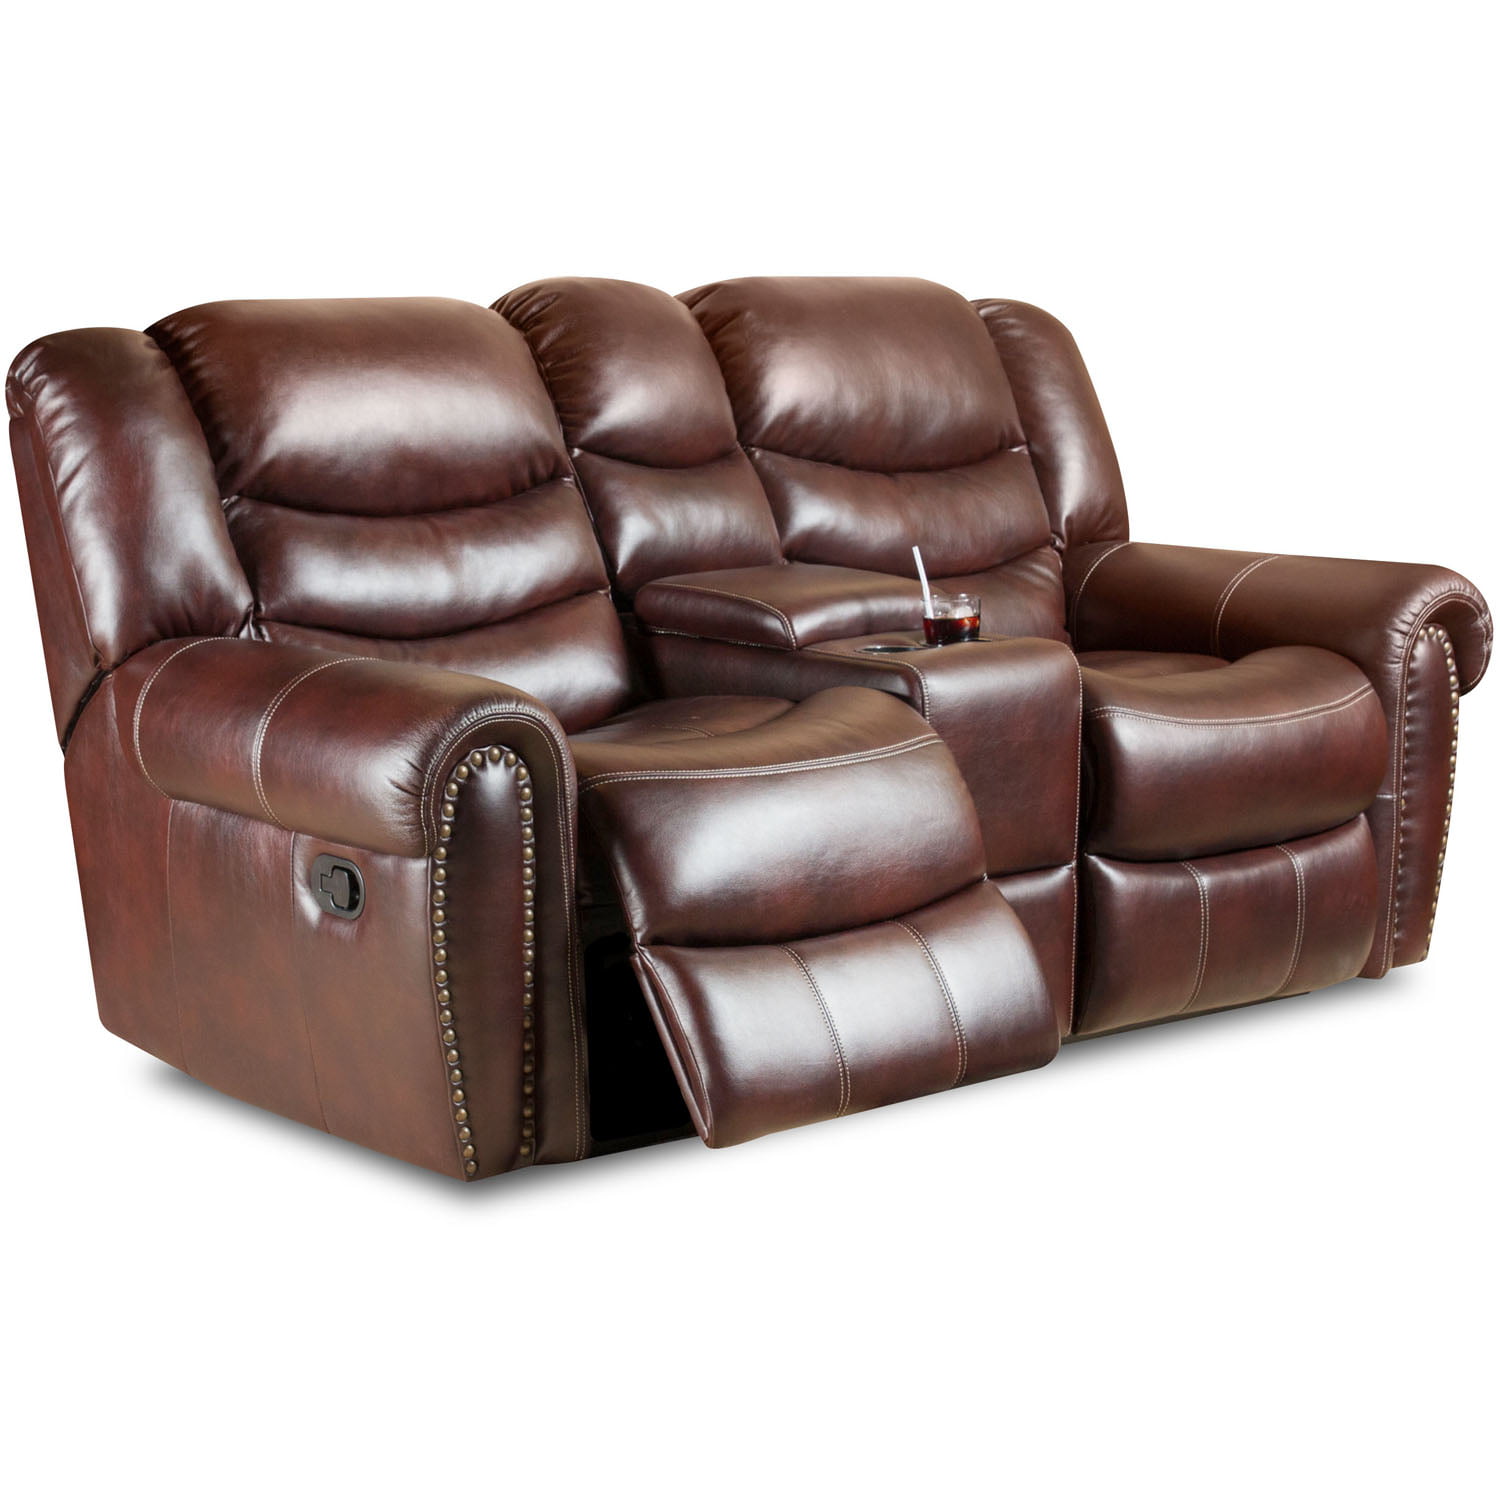 Cozy Reclining Loveseats For Home Theaters